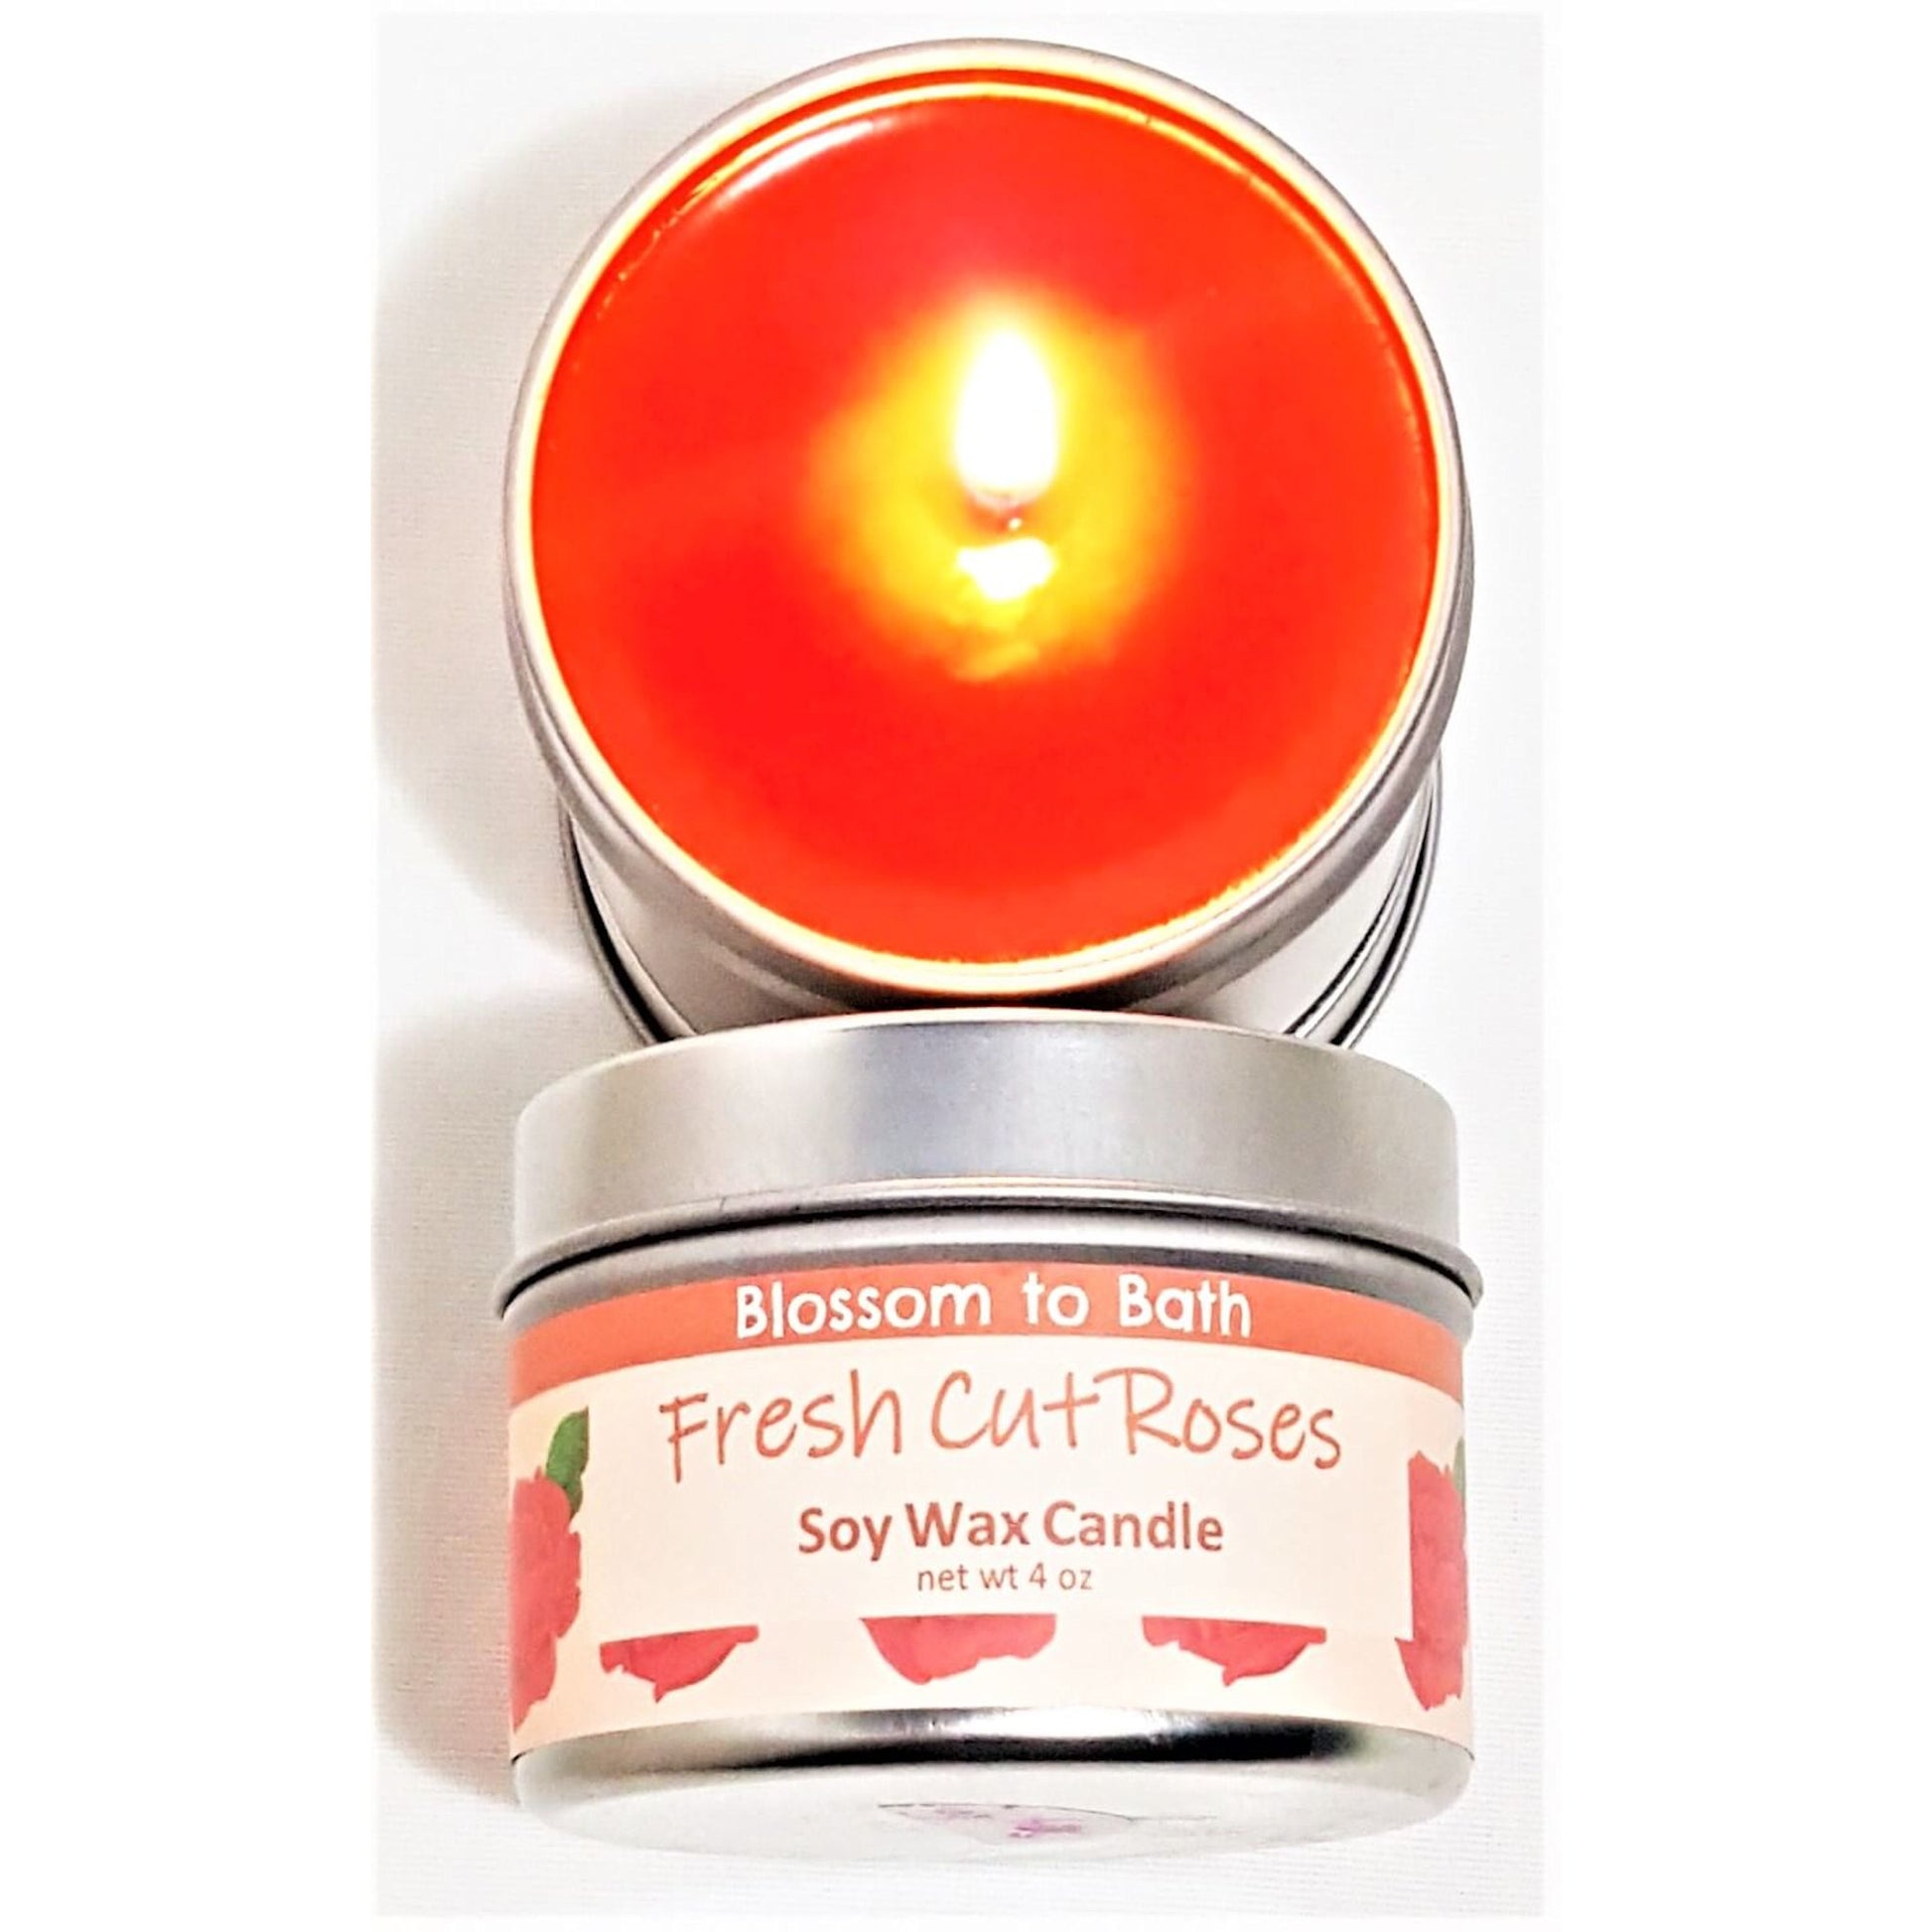 Buy Blossom to Bath Fresh Cut Roses Soy Wax Candle from Flowersong Soap Studio.  Fill the air with a charming fragrance that lasts for hours  A true rose fragrance, the scent captures the splendor of a newly blossomed rose.